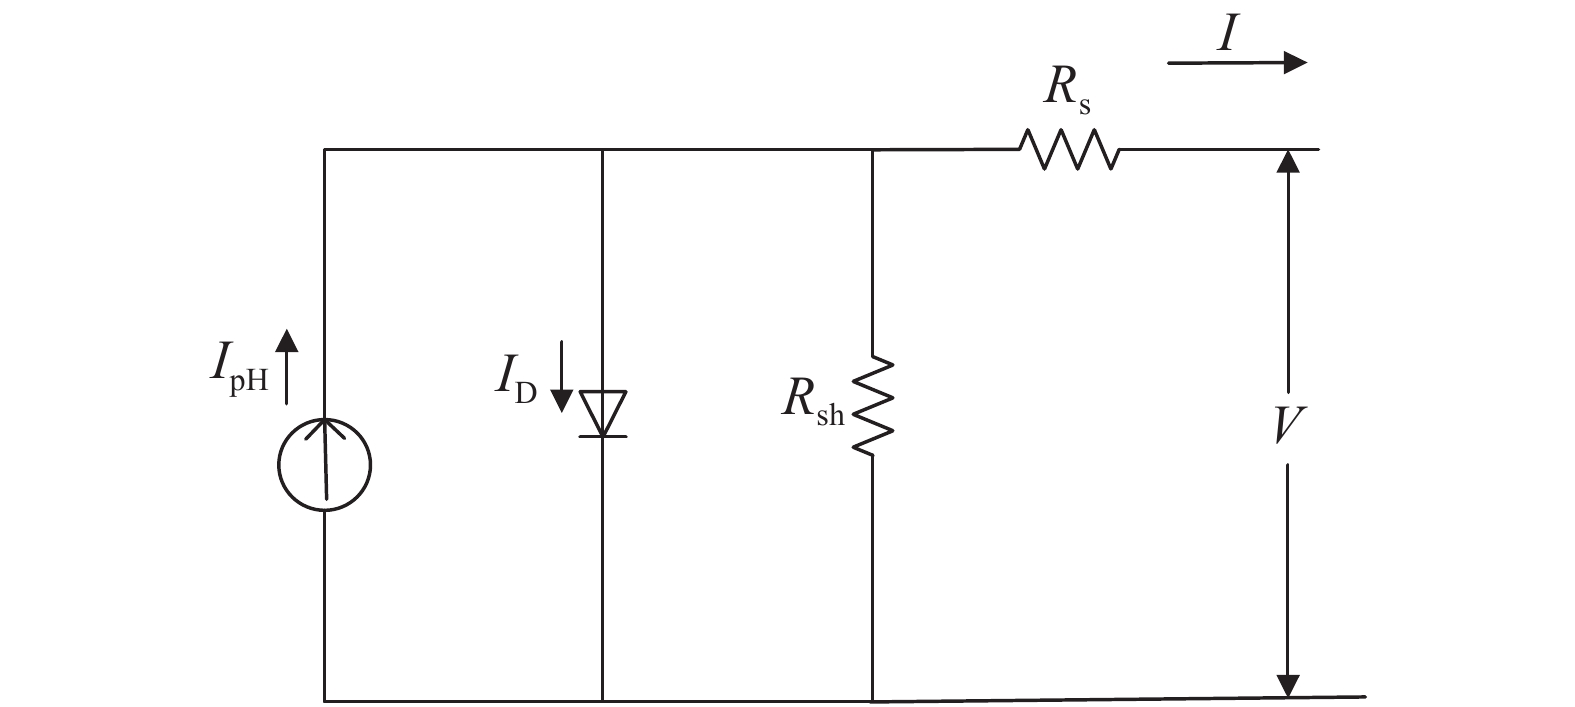 Equivalent circuit model of solar cell